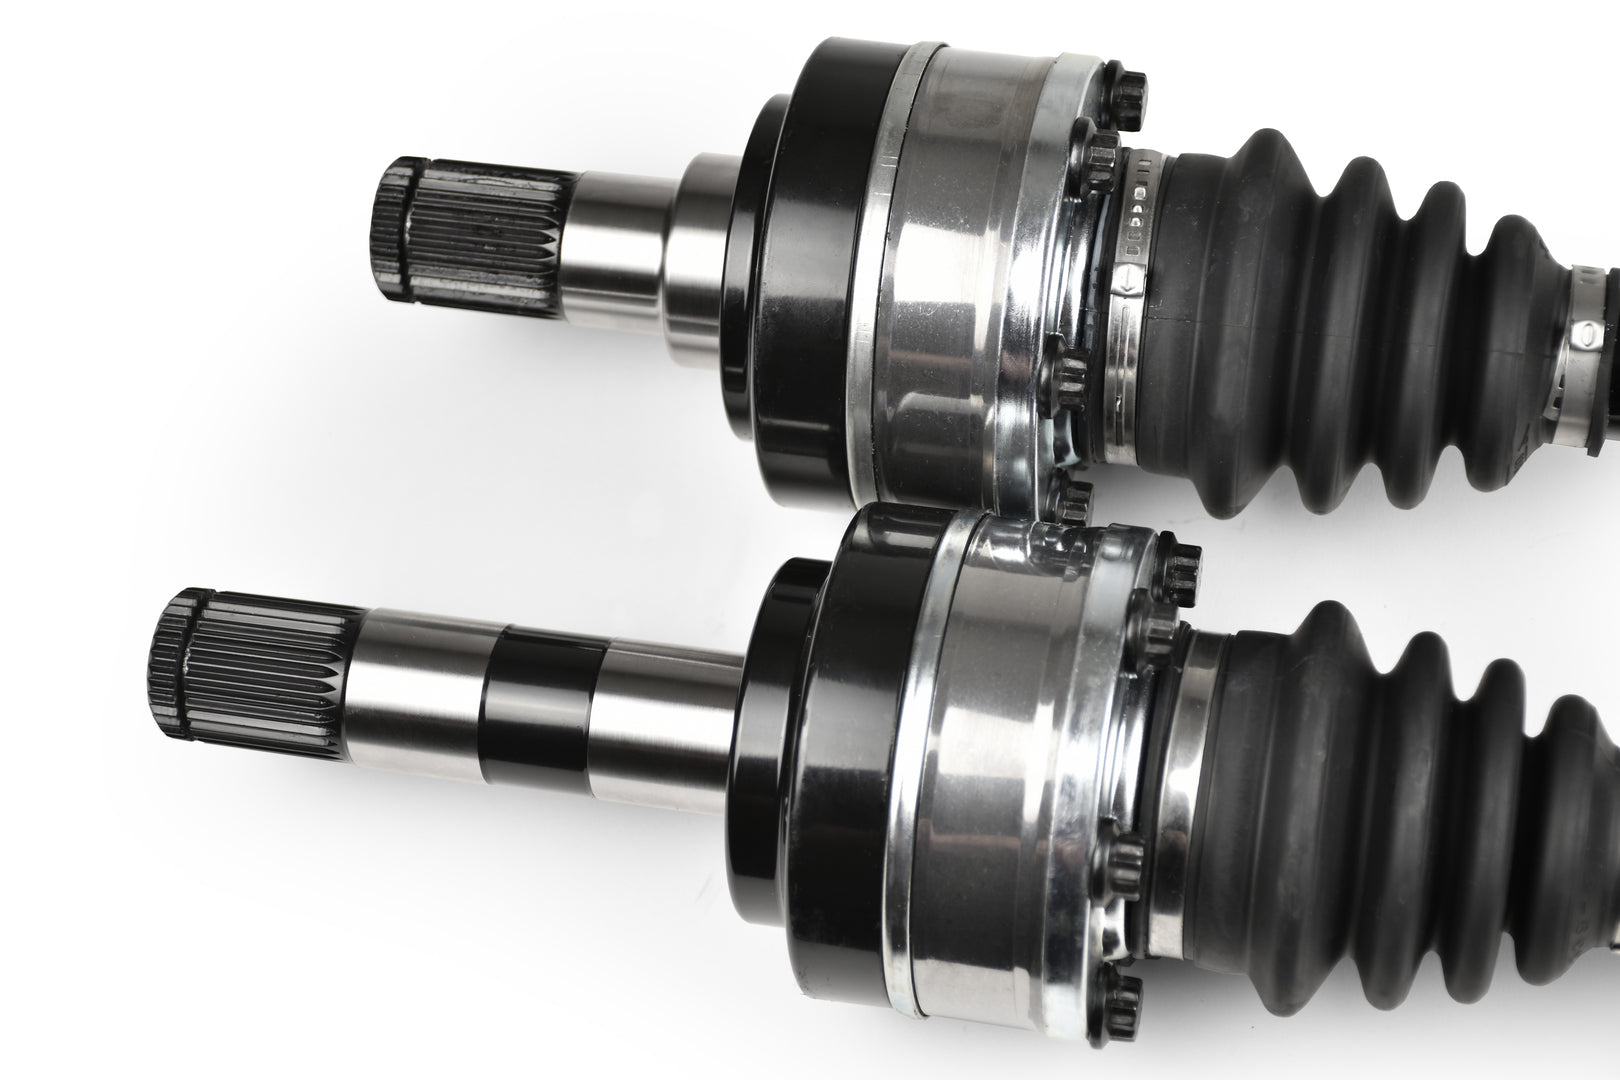 2018-trackhawk-6-2-outlaw-axles-w-exotic-alloy-inner-stubs-1